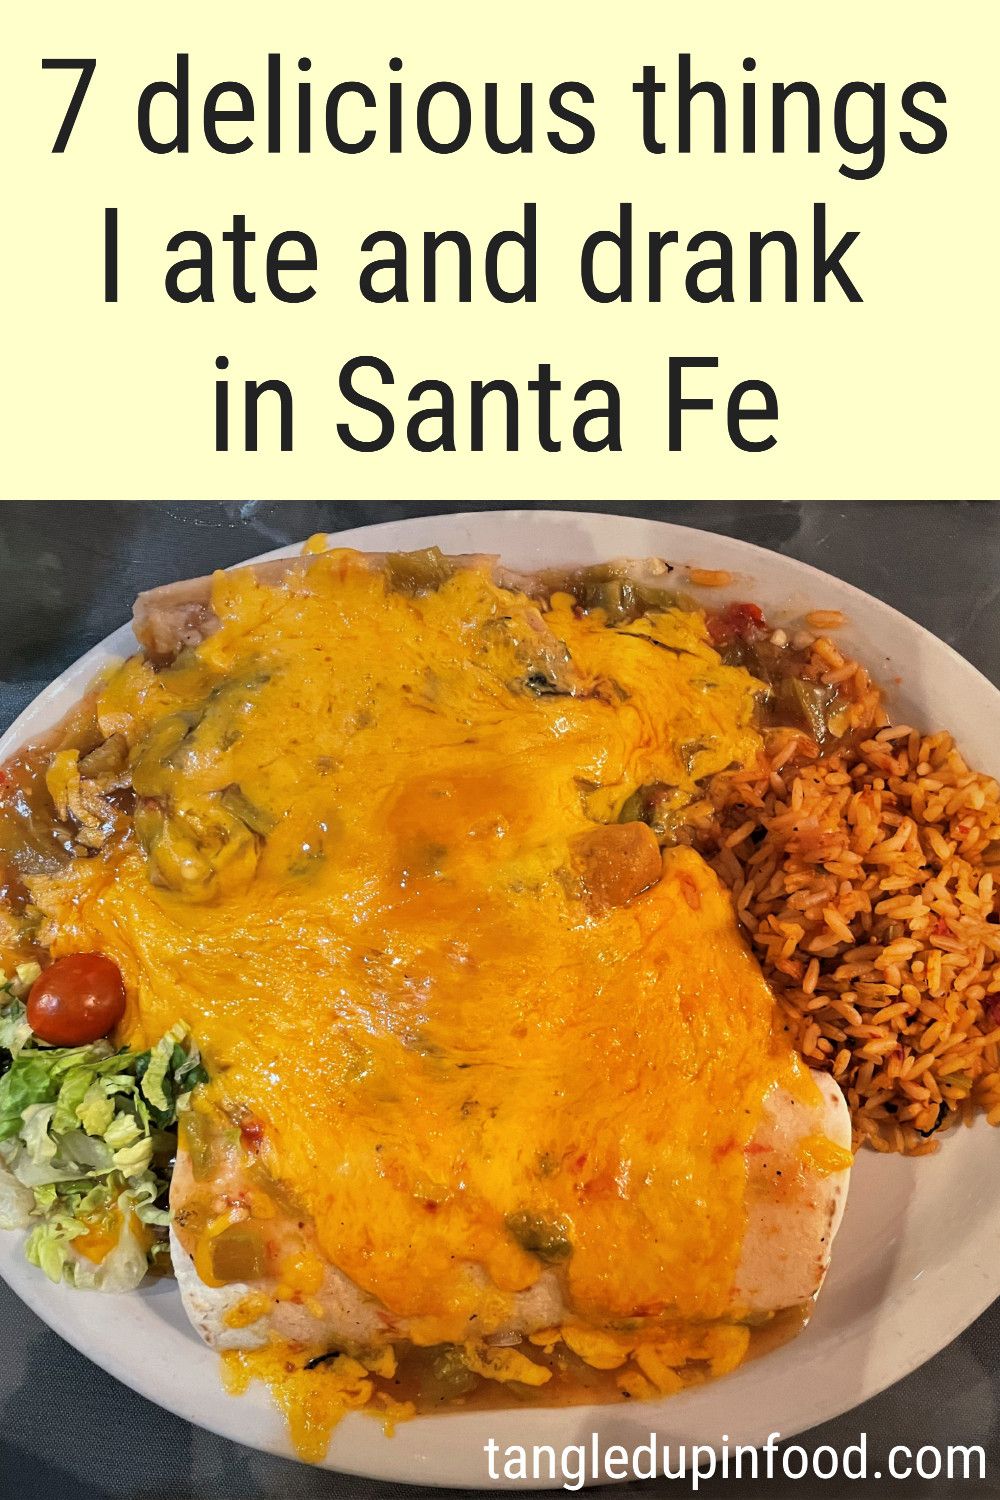 PLate of food covered with cheese and text reading "7 delicious things I ate and drank in Santa Fe"